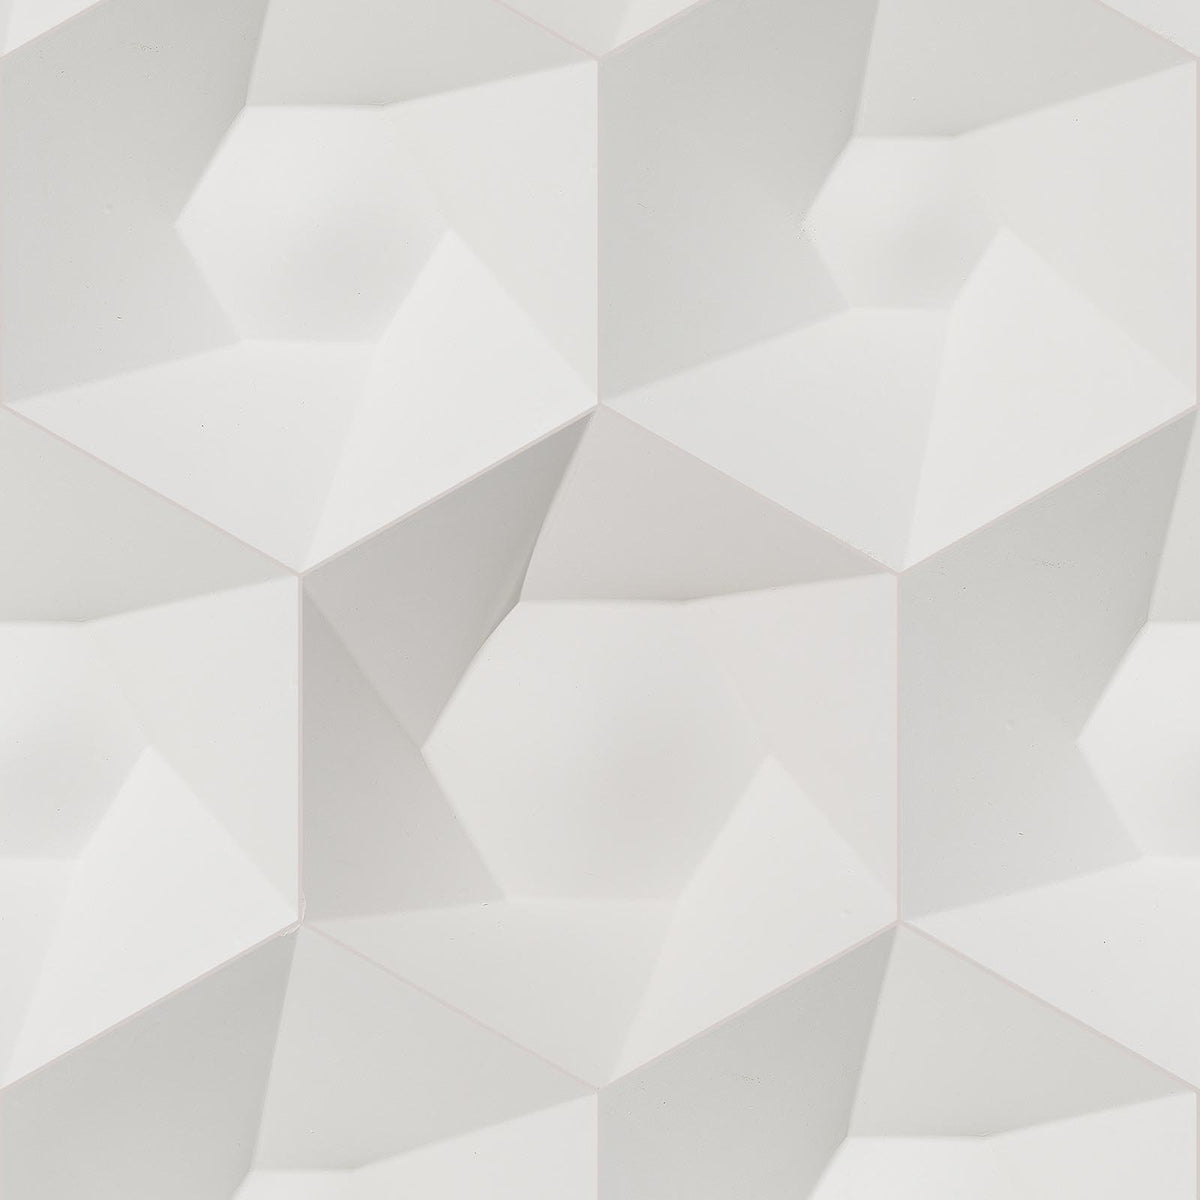 VOS-01 Hexa Ceramics wallpaper by Roderick Vos for NLXL